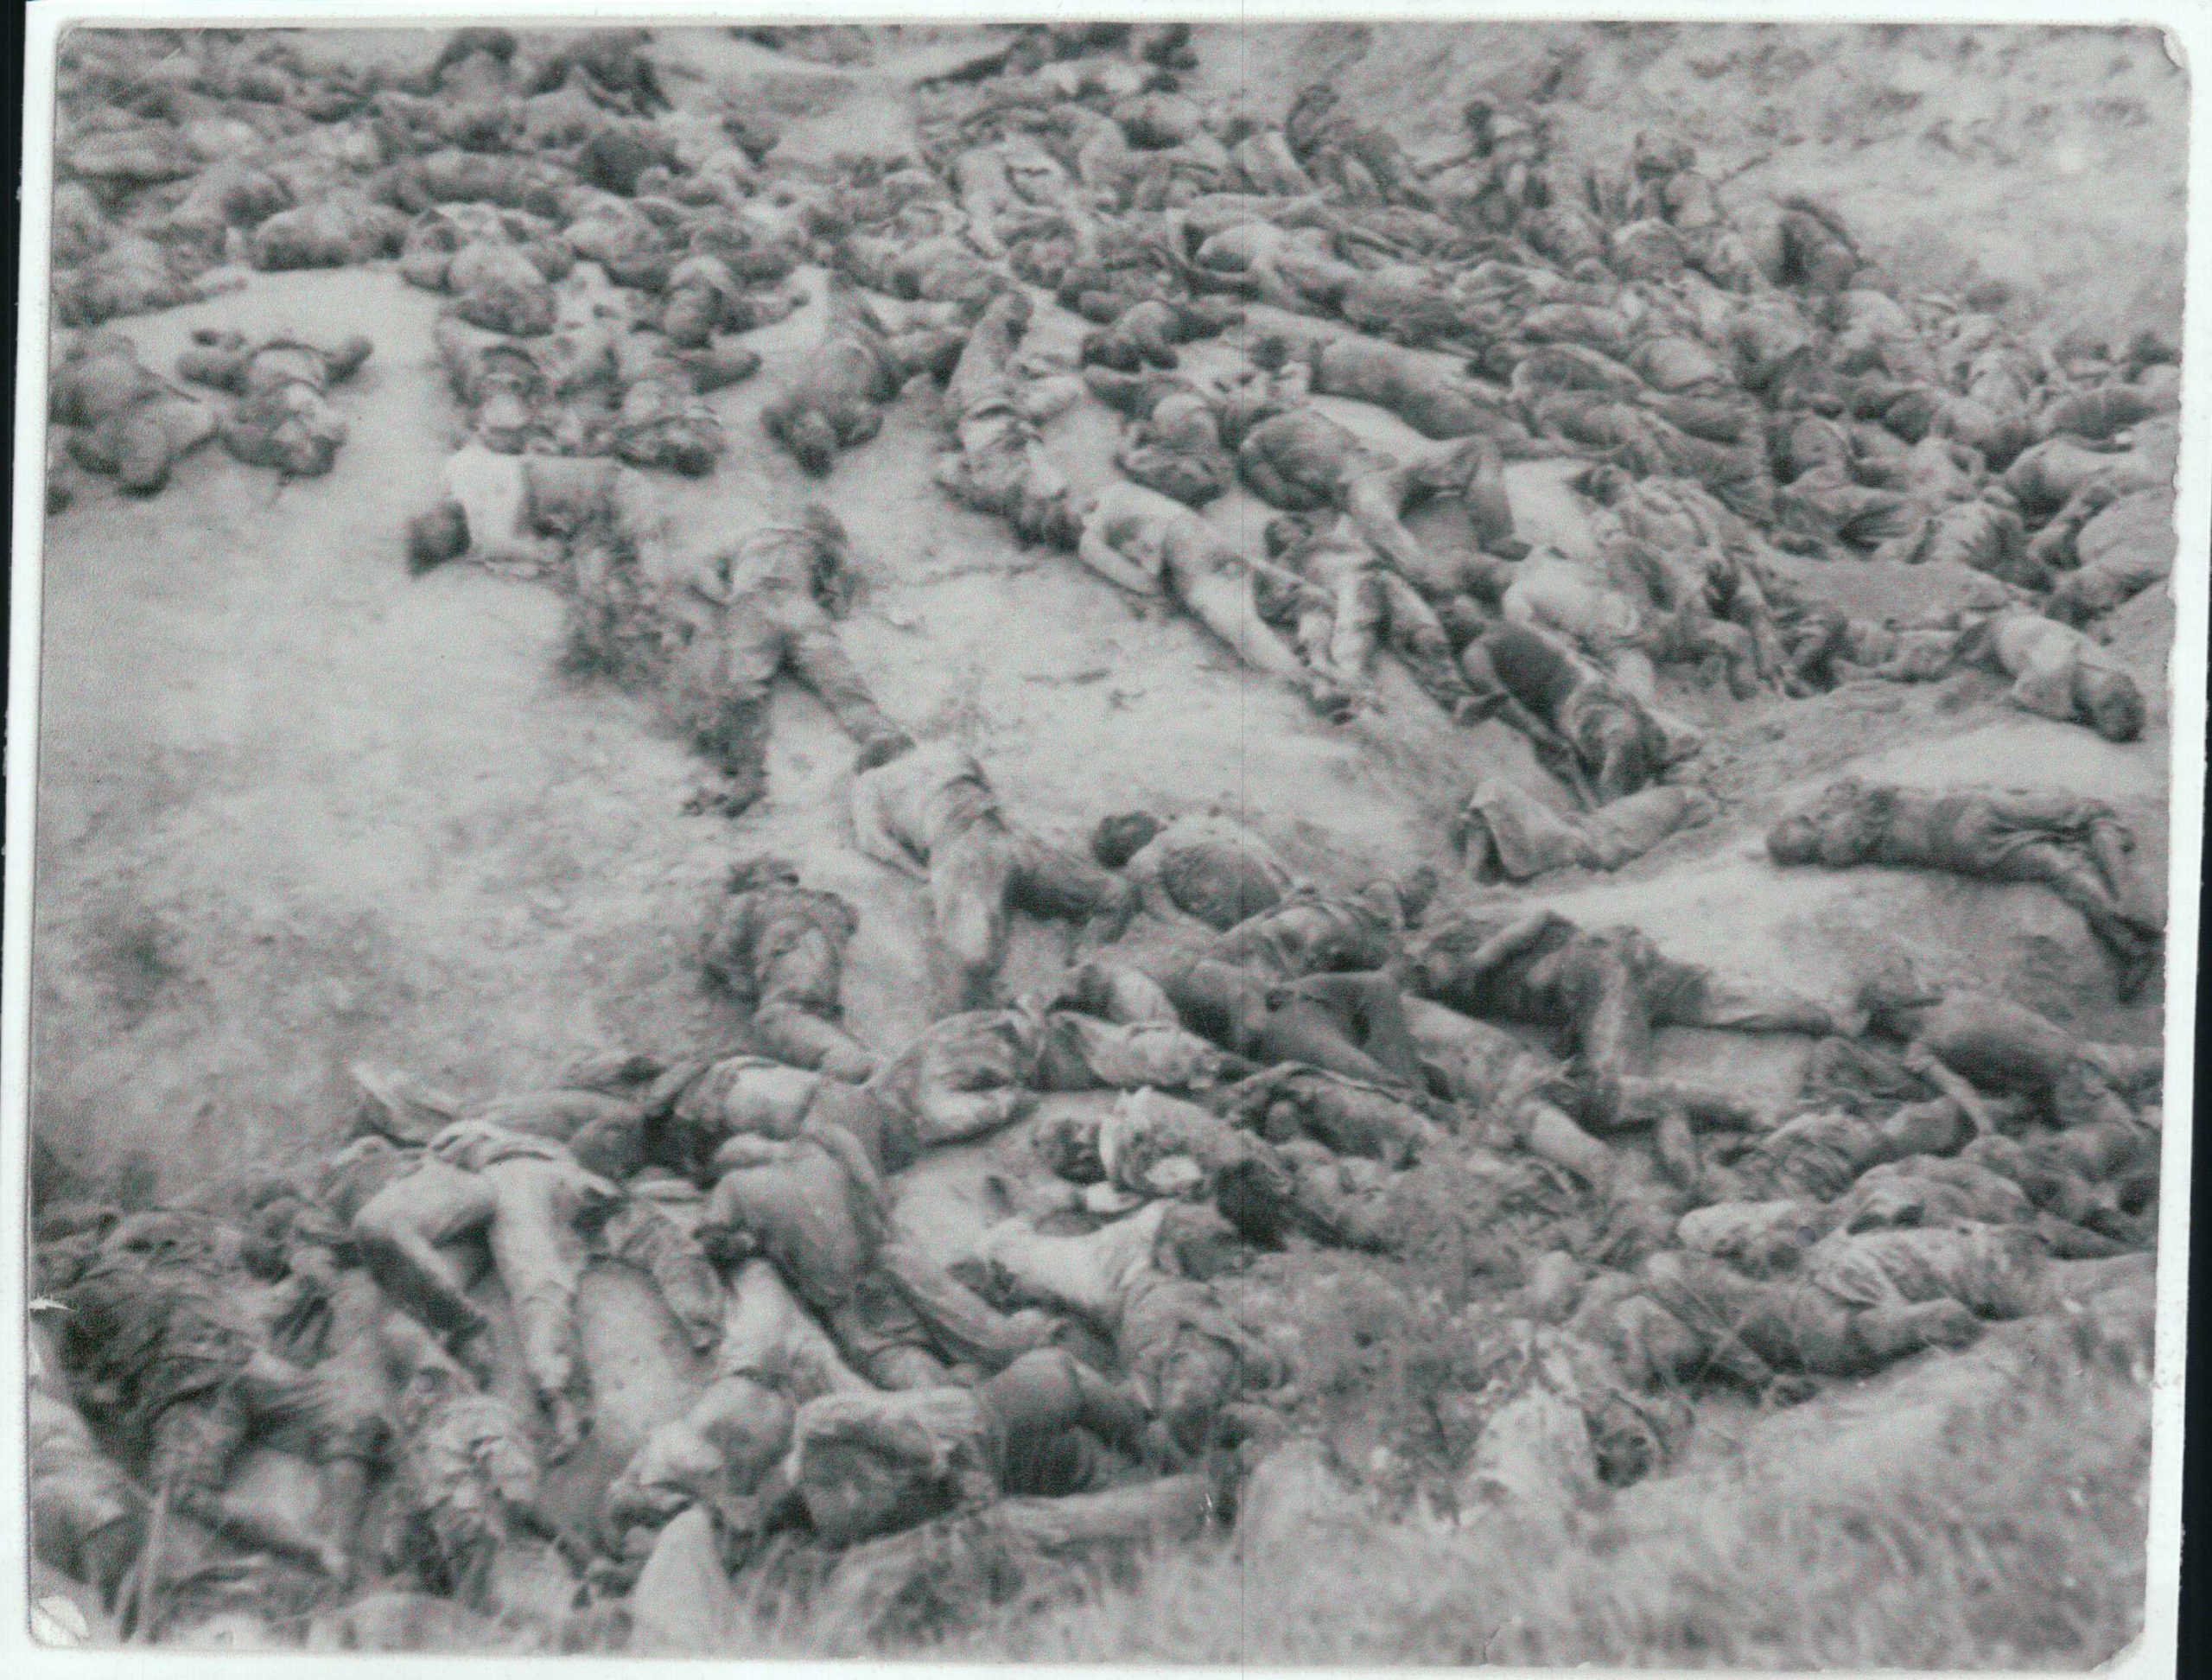 Another View of Mass Burial